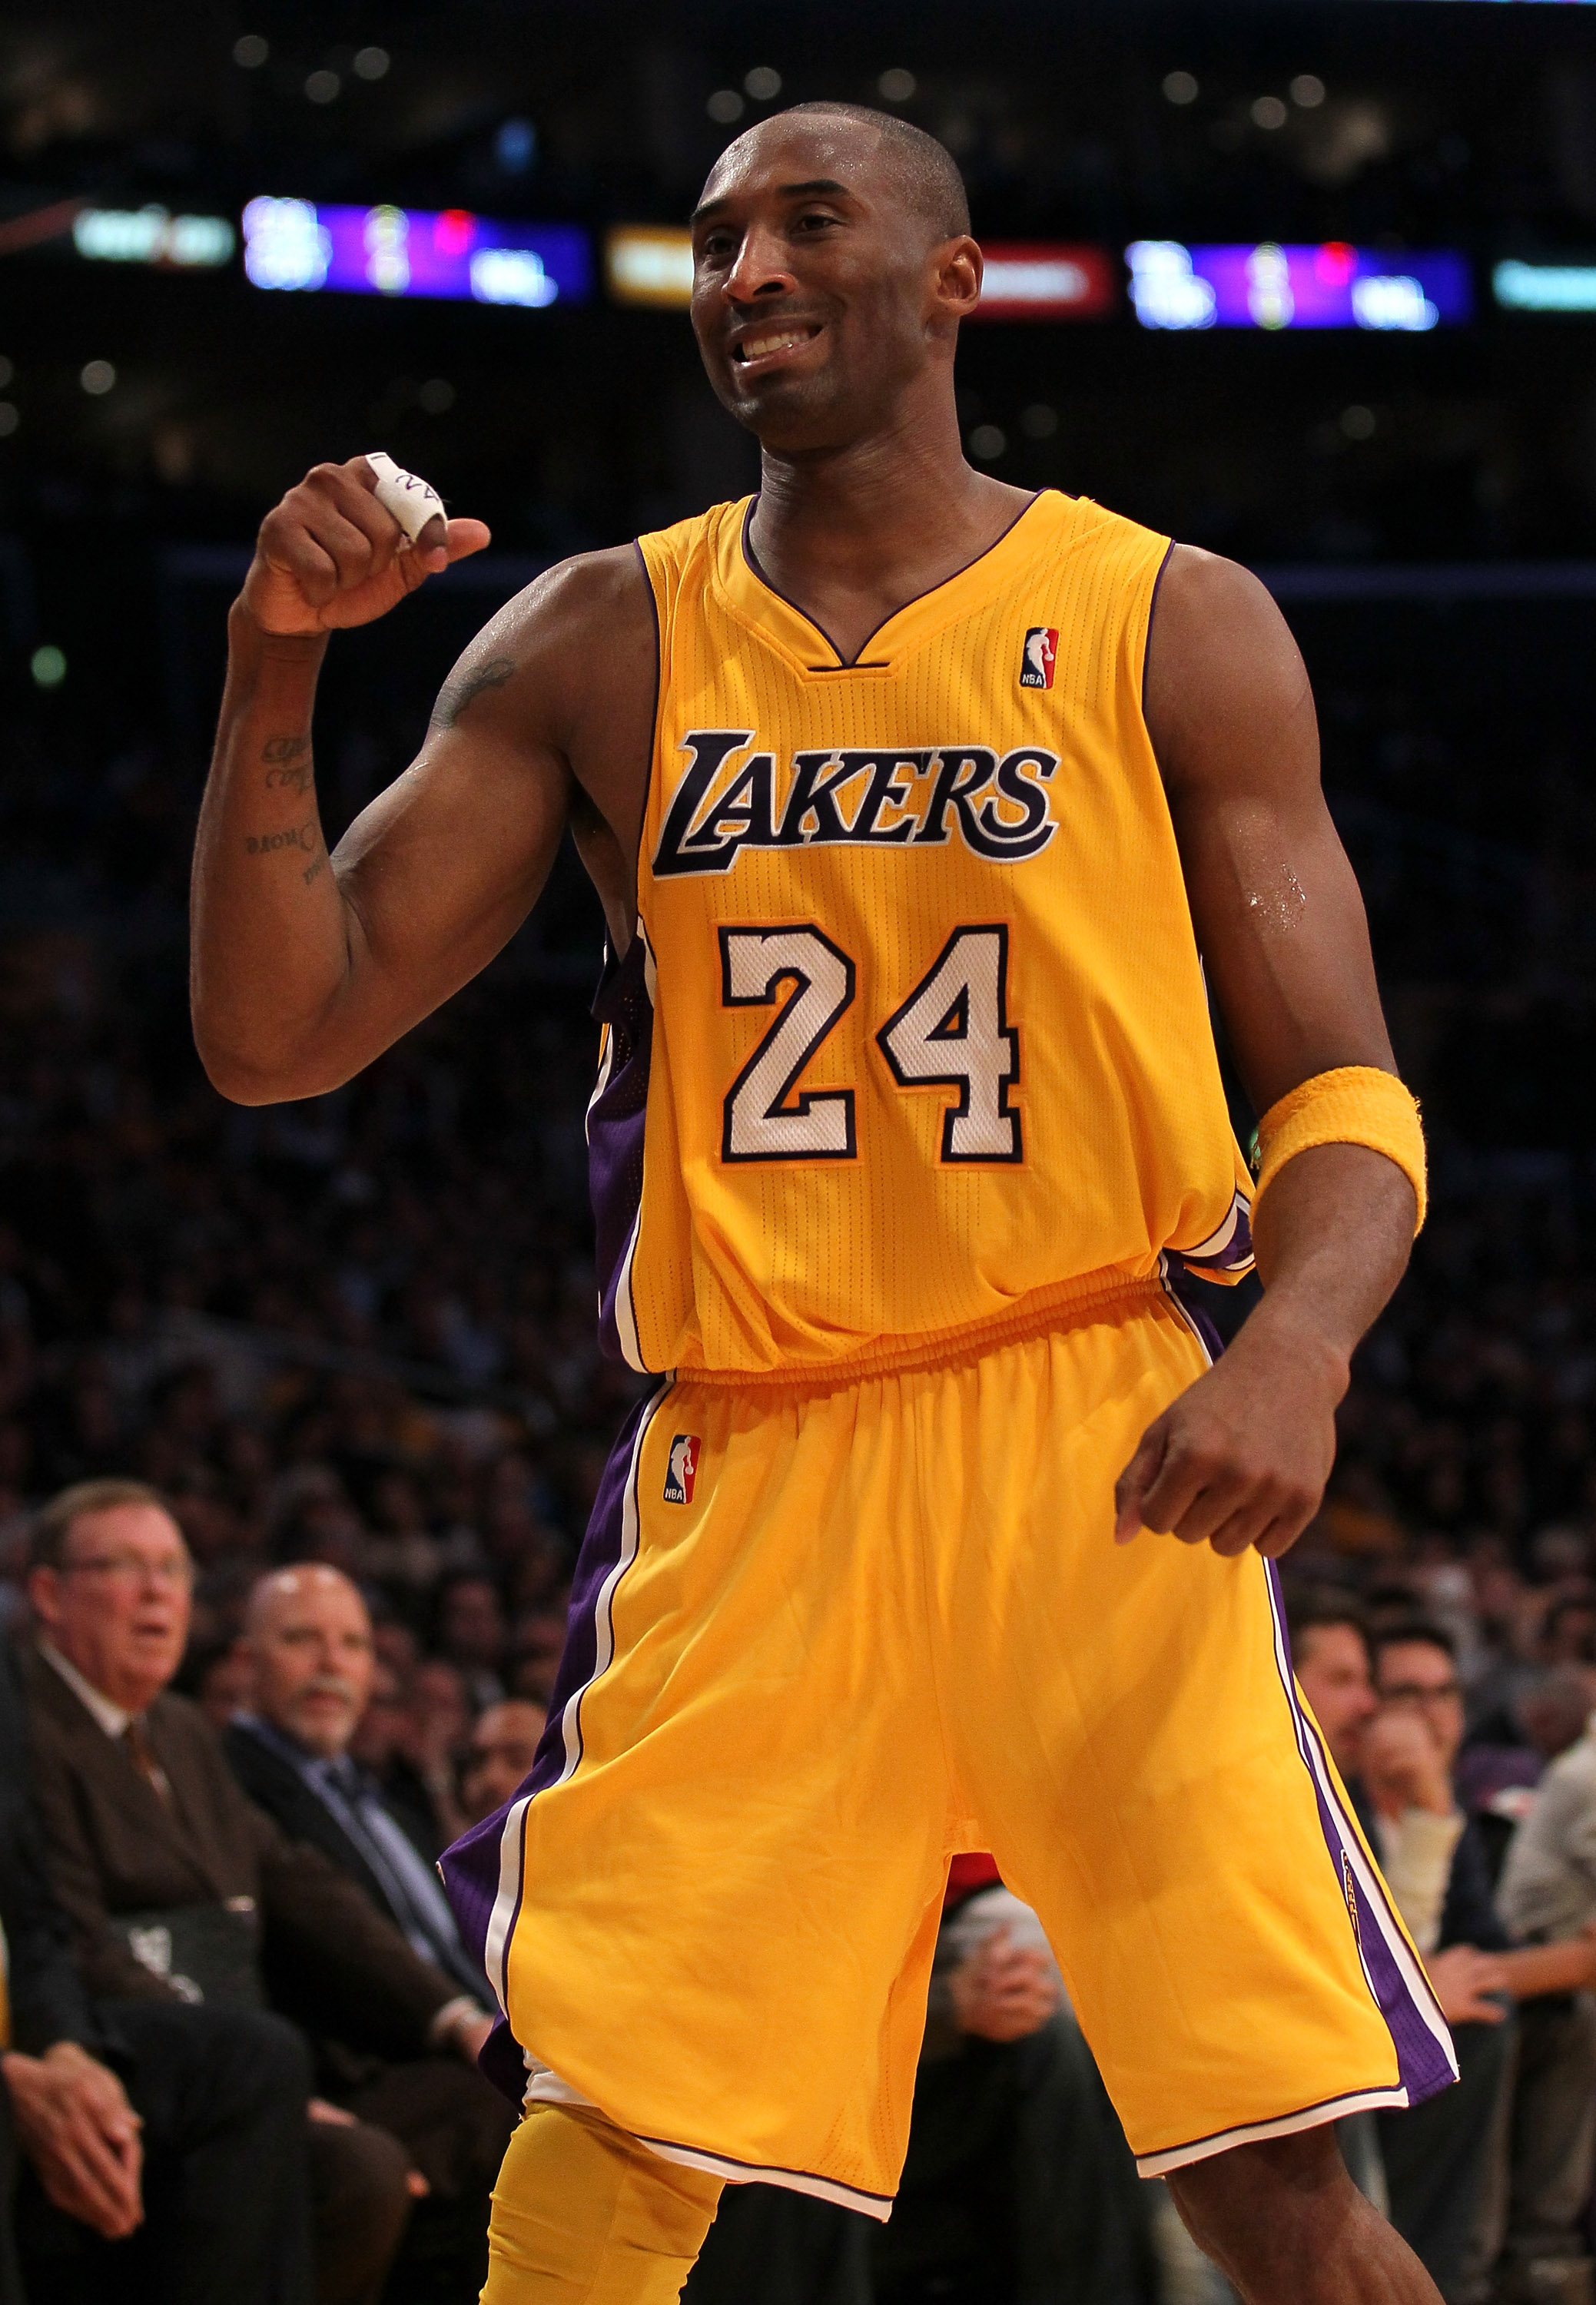 Bleacher Report - Stats from Kobe's 81-point game